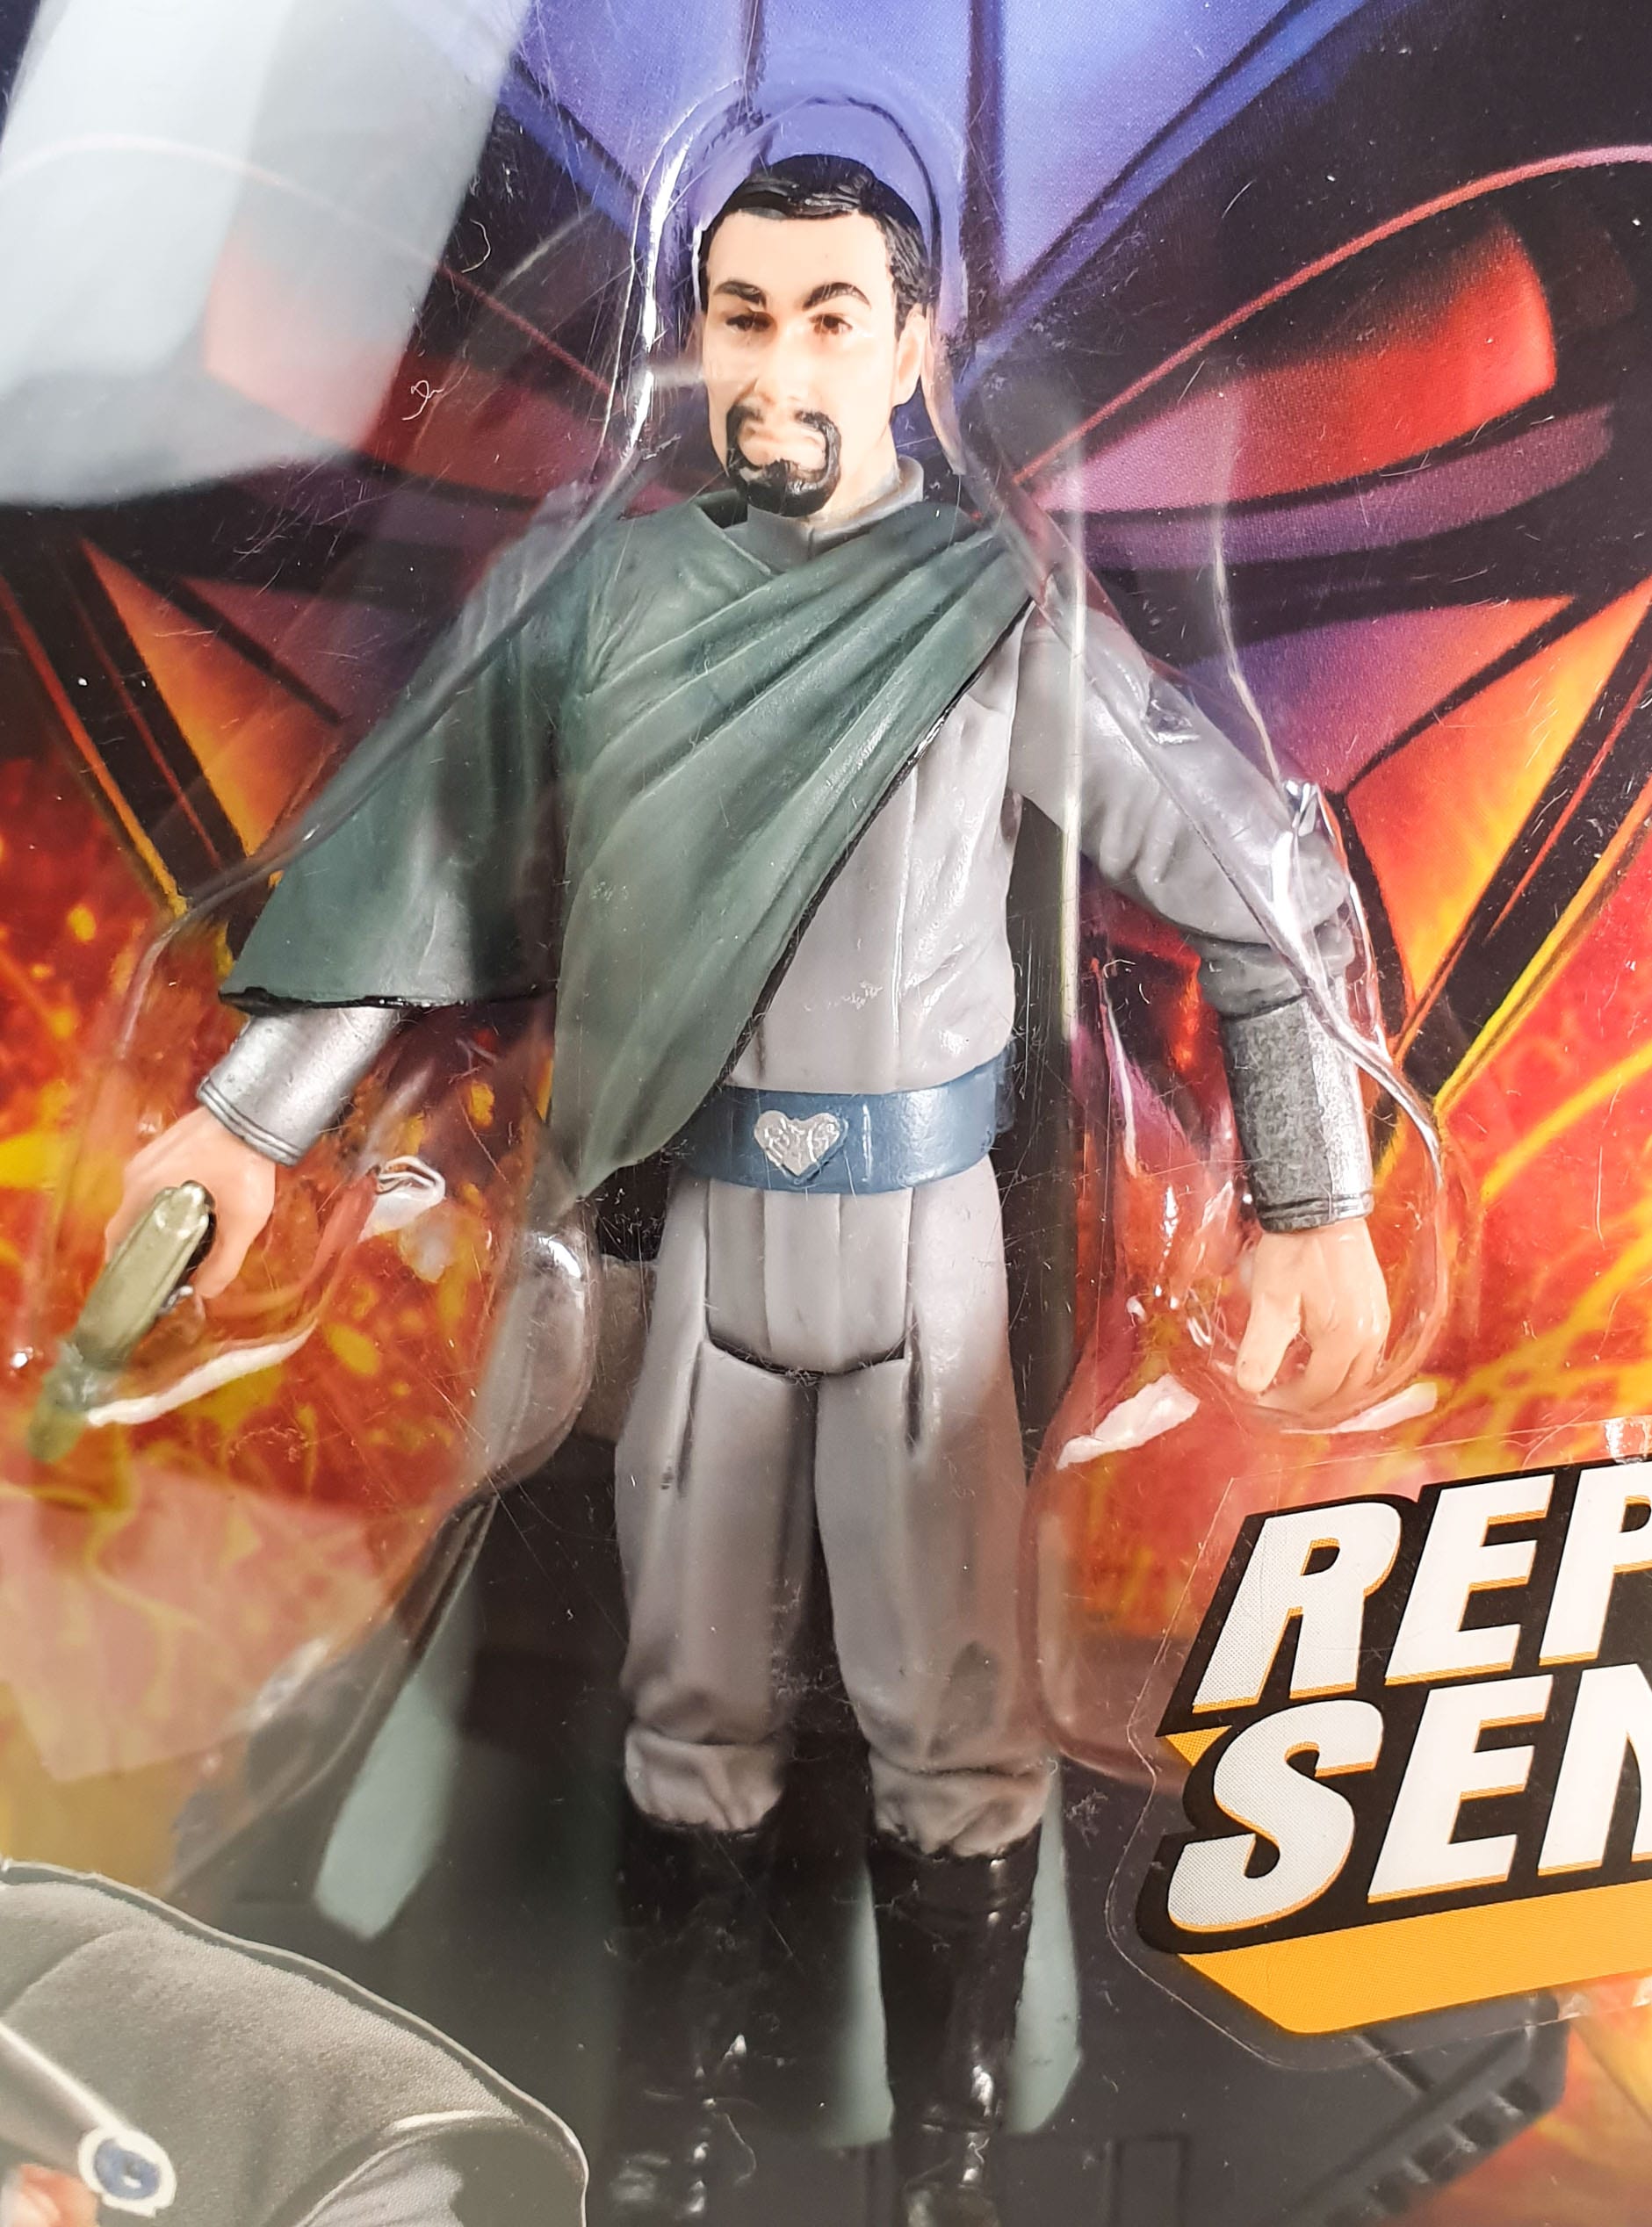 Bail Organa #15 Episode III Revenge of the Sith 3.75/" Action Figure Star Wars